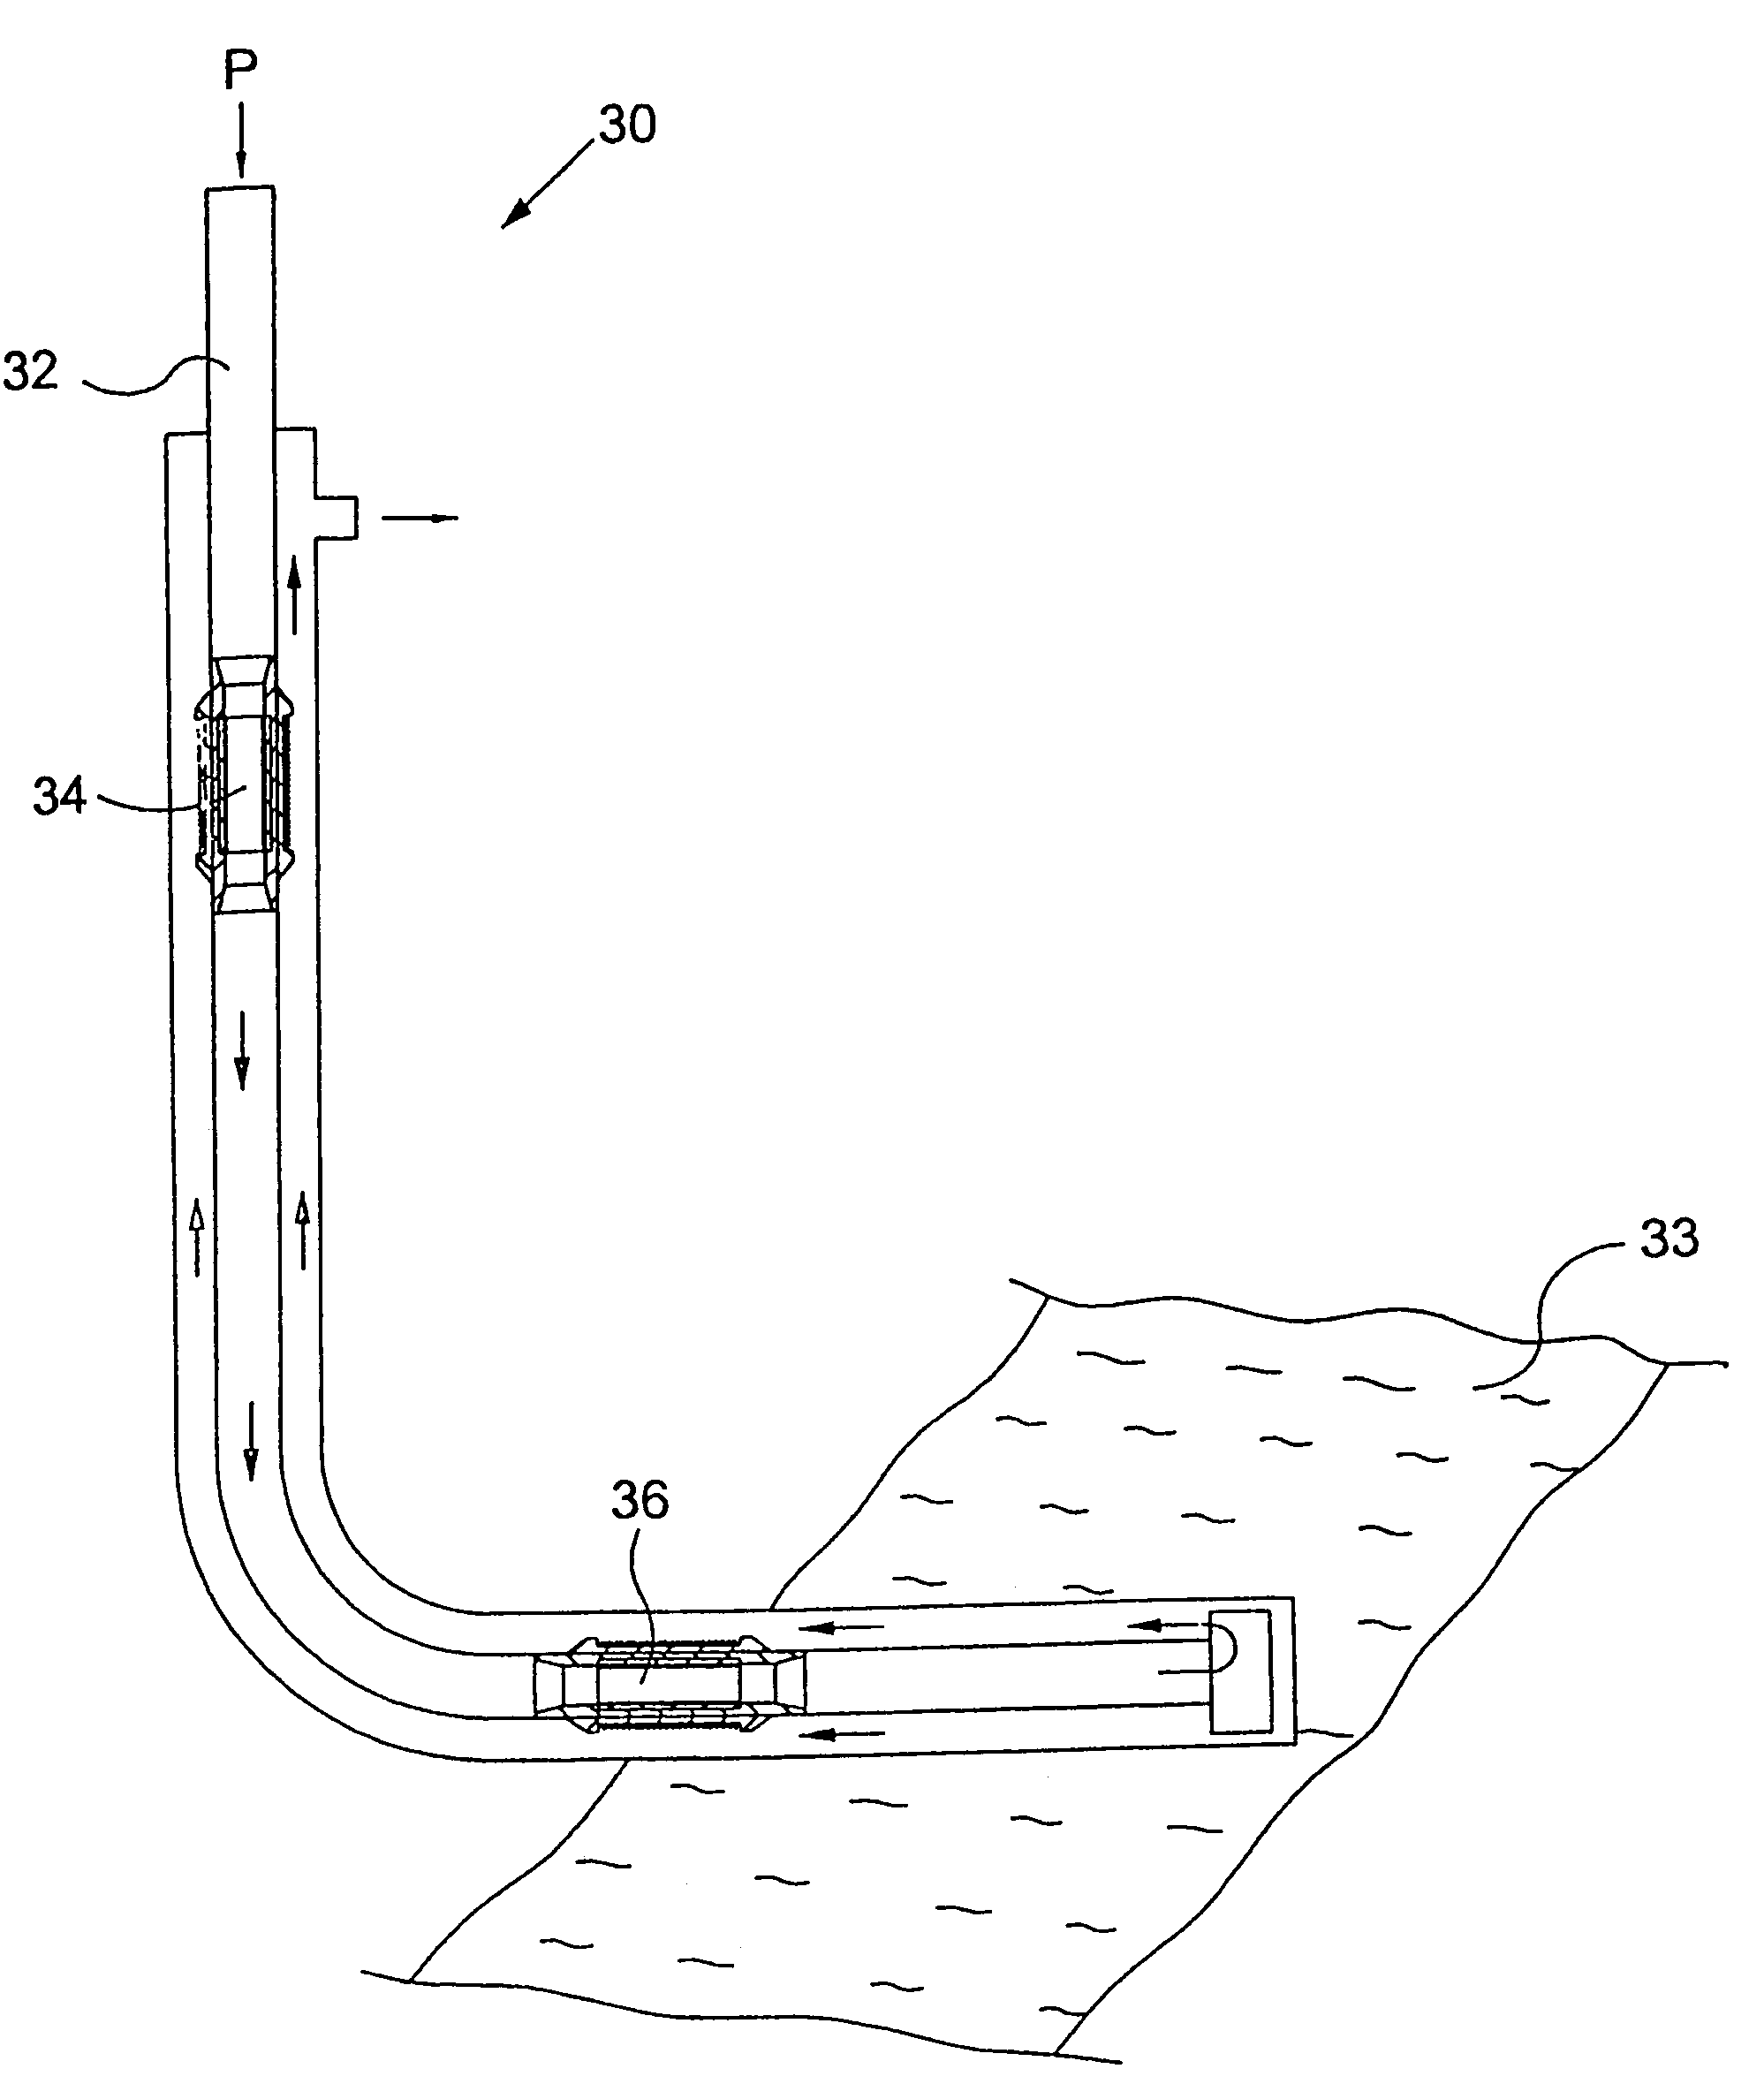 Apparatus and methods for drilling